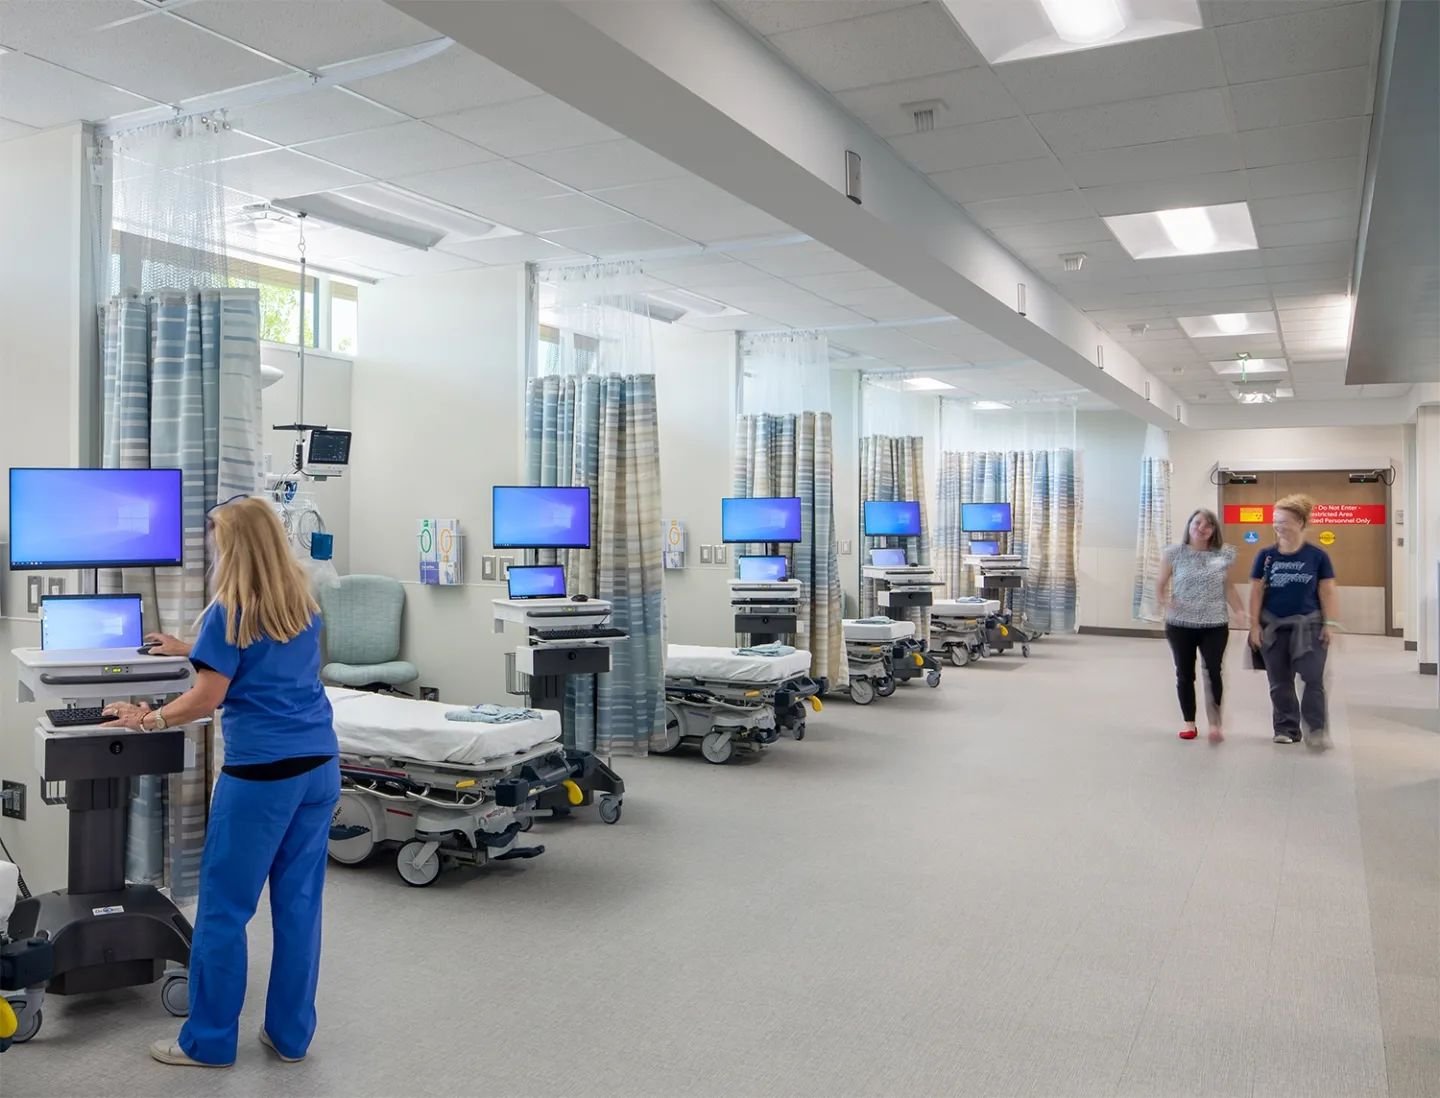 Explore @healthcaresnapshots showcasing our Tanner Health West Georgia Surgery Center project! Our design emphasizes patient comfort and healing with innovative healthcare concepts, seamlessly integrating natural elements with state-of-the-art techno